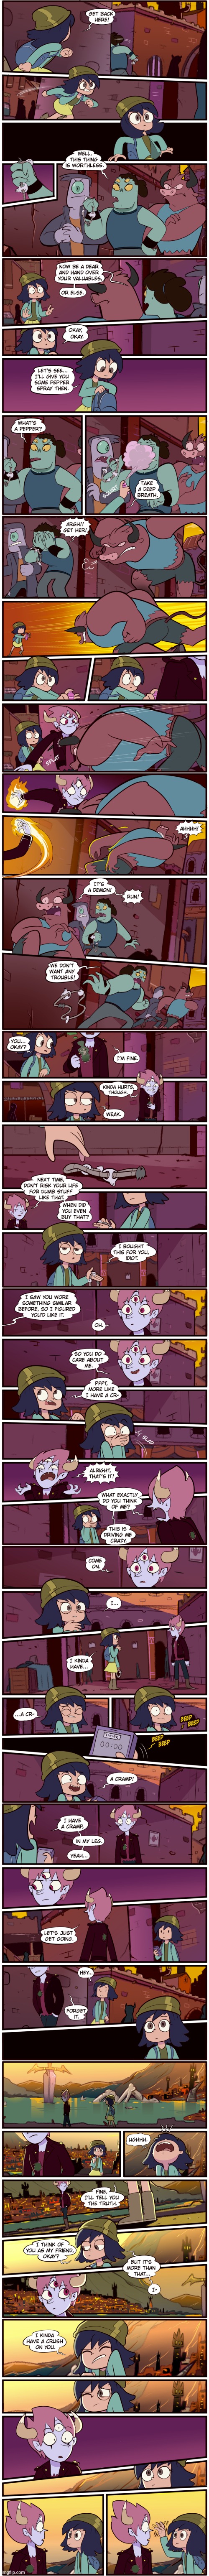 Tom vs Jannanigans: Are We There Yet? (Part 4) | image tagged in morningmark,comics/cartoons,svtfoe,star vs the forces of evil,comics,memes | made w/ Imgflip meme maker